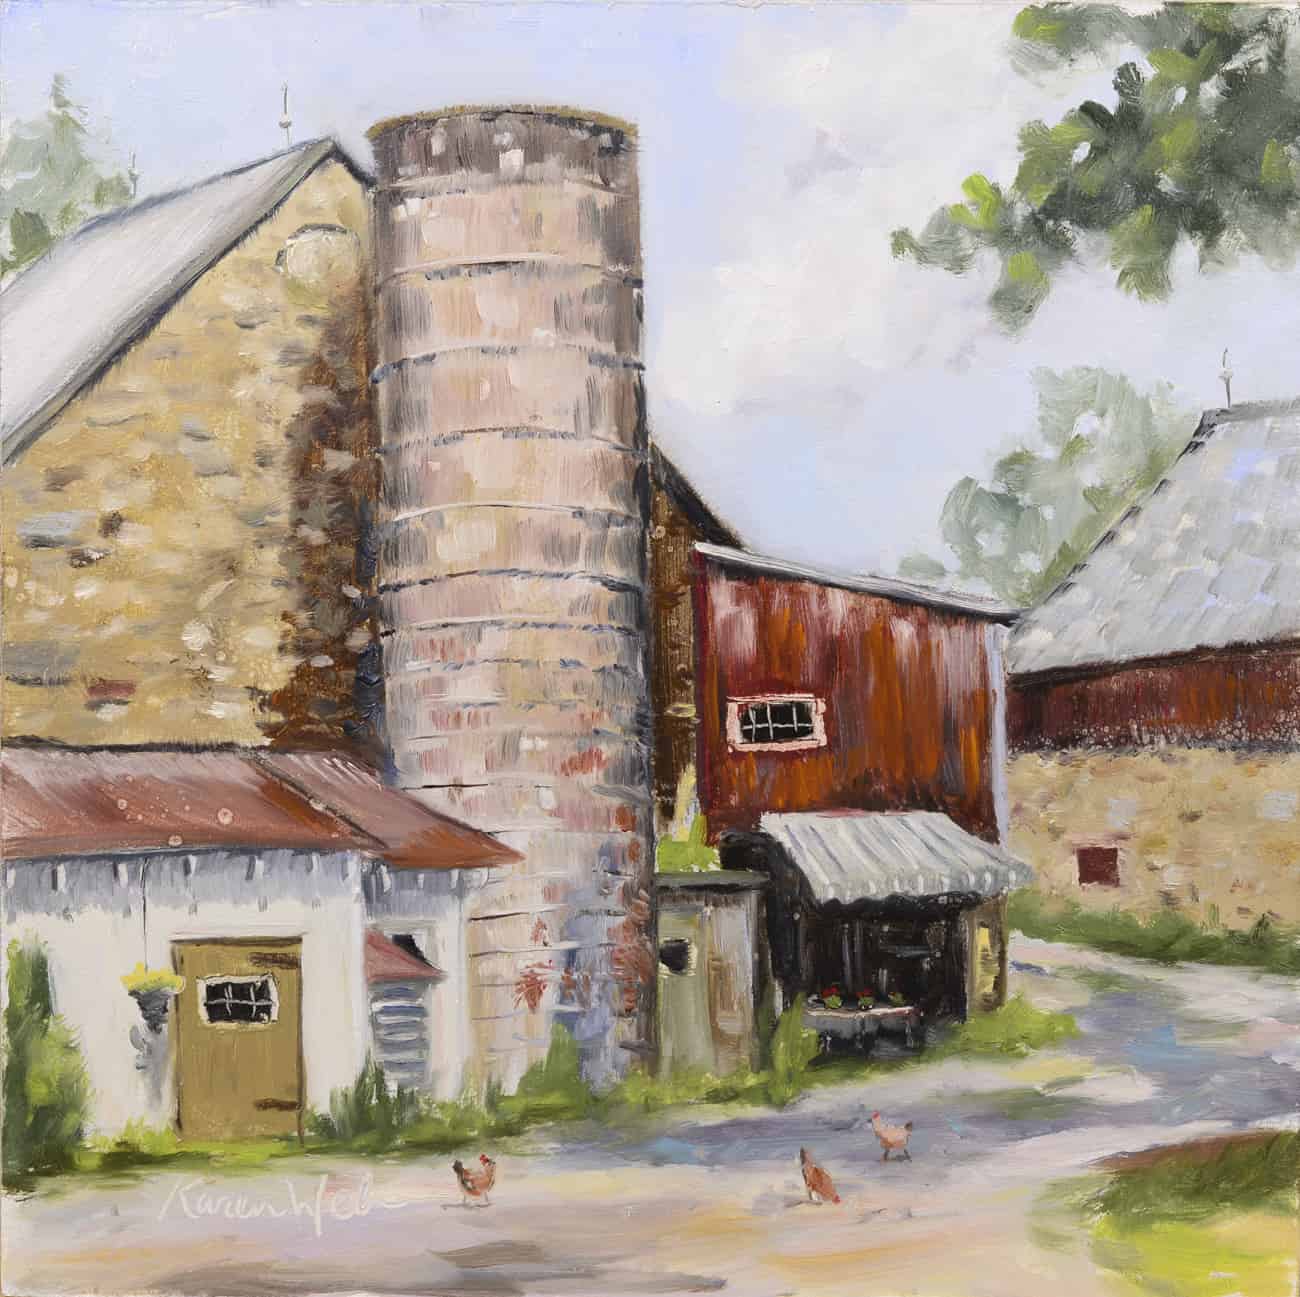 Painting by artist Karen Weber of a milk house and barn in Oley, Pennsylvania